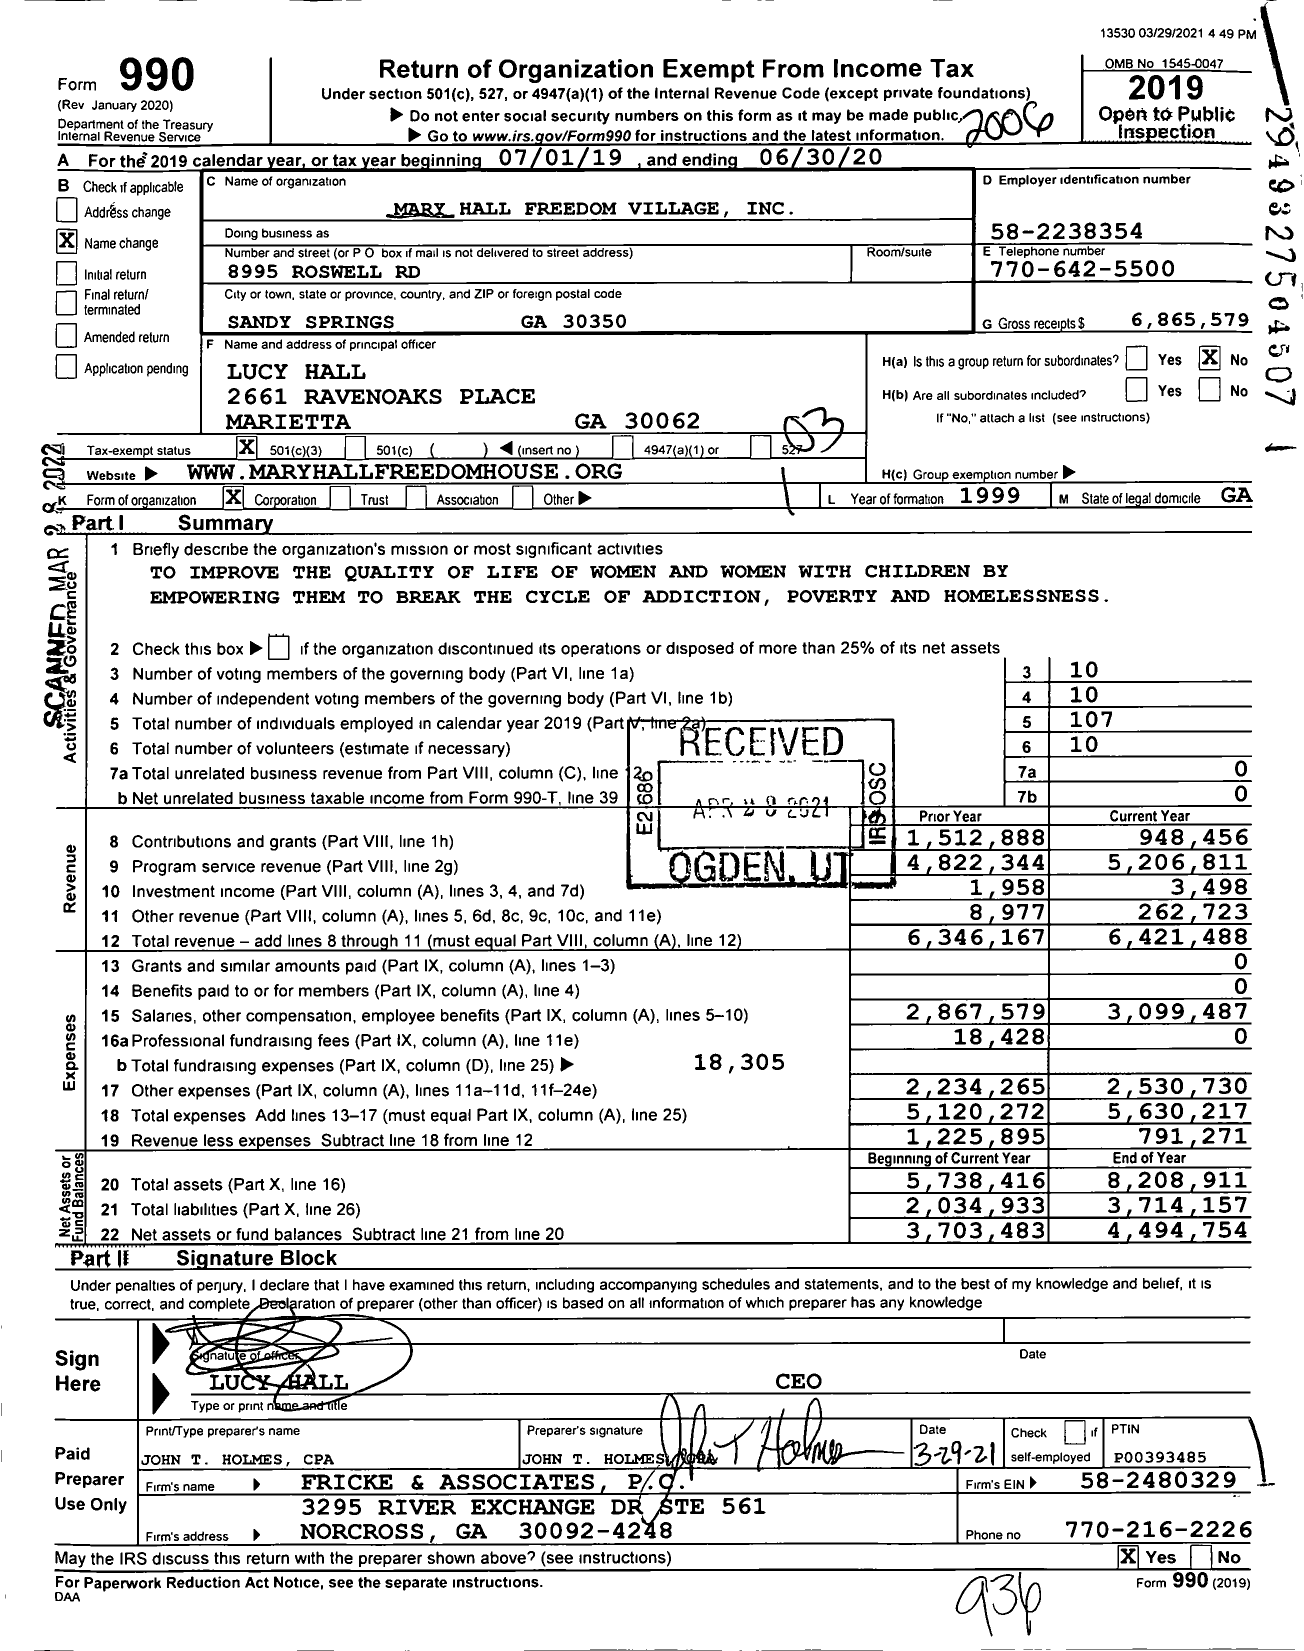 Image of first page of 2019 Form 990 for Mary Hall Freedom Village